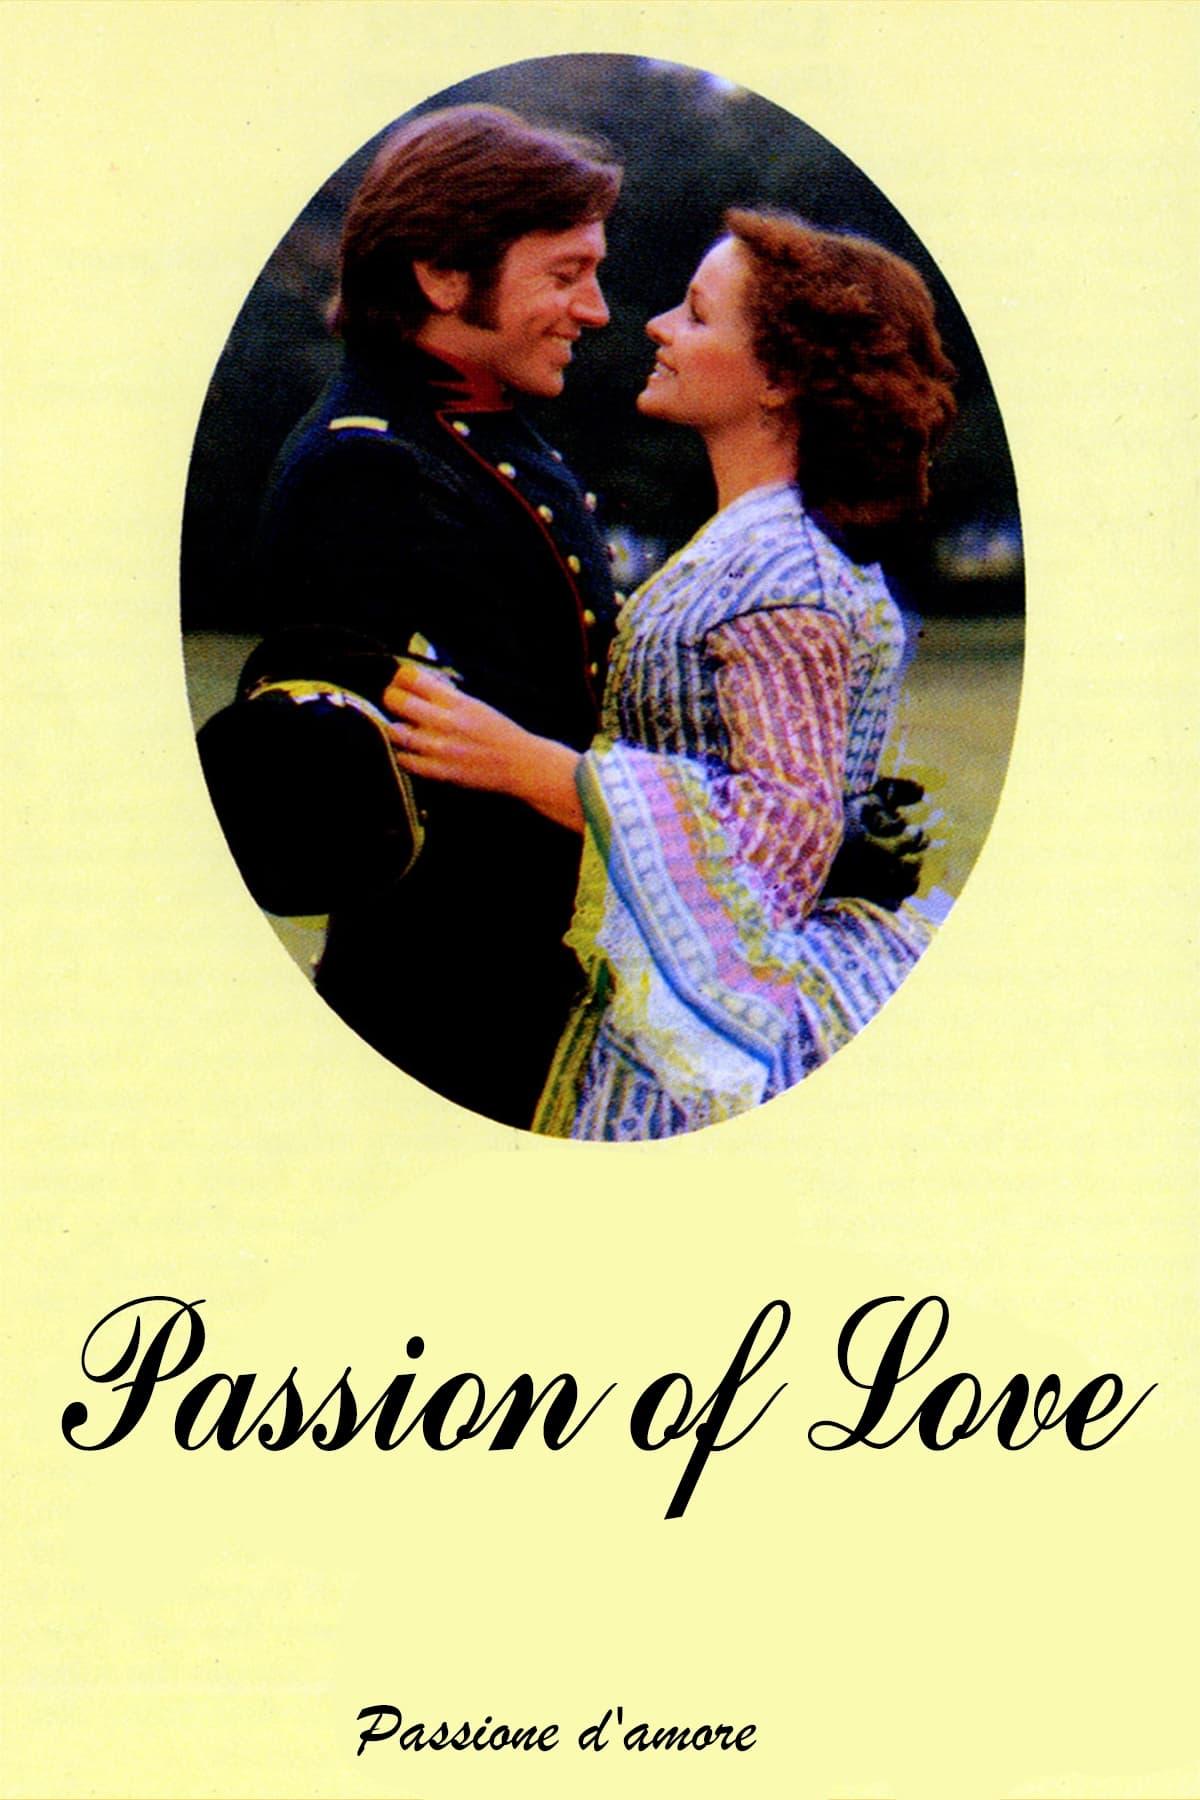 Passion of Love poster